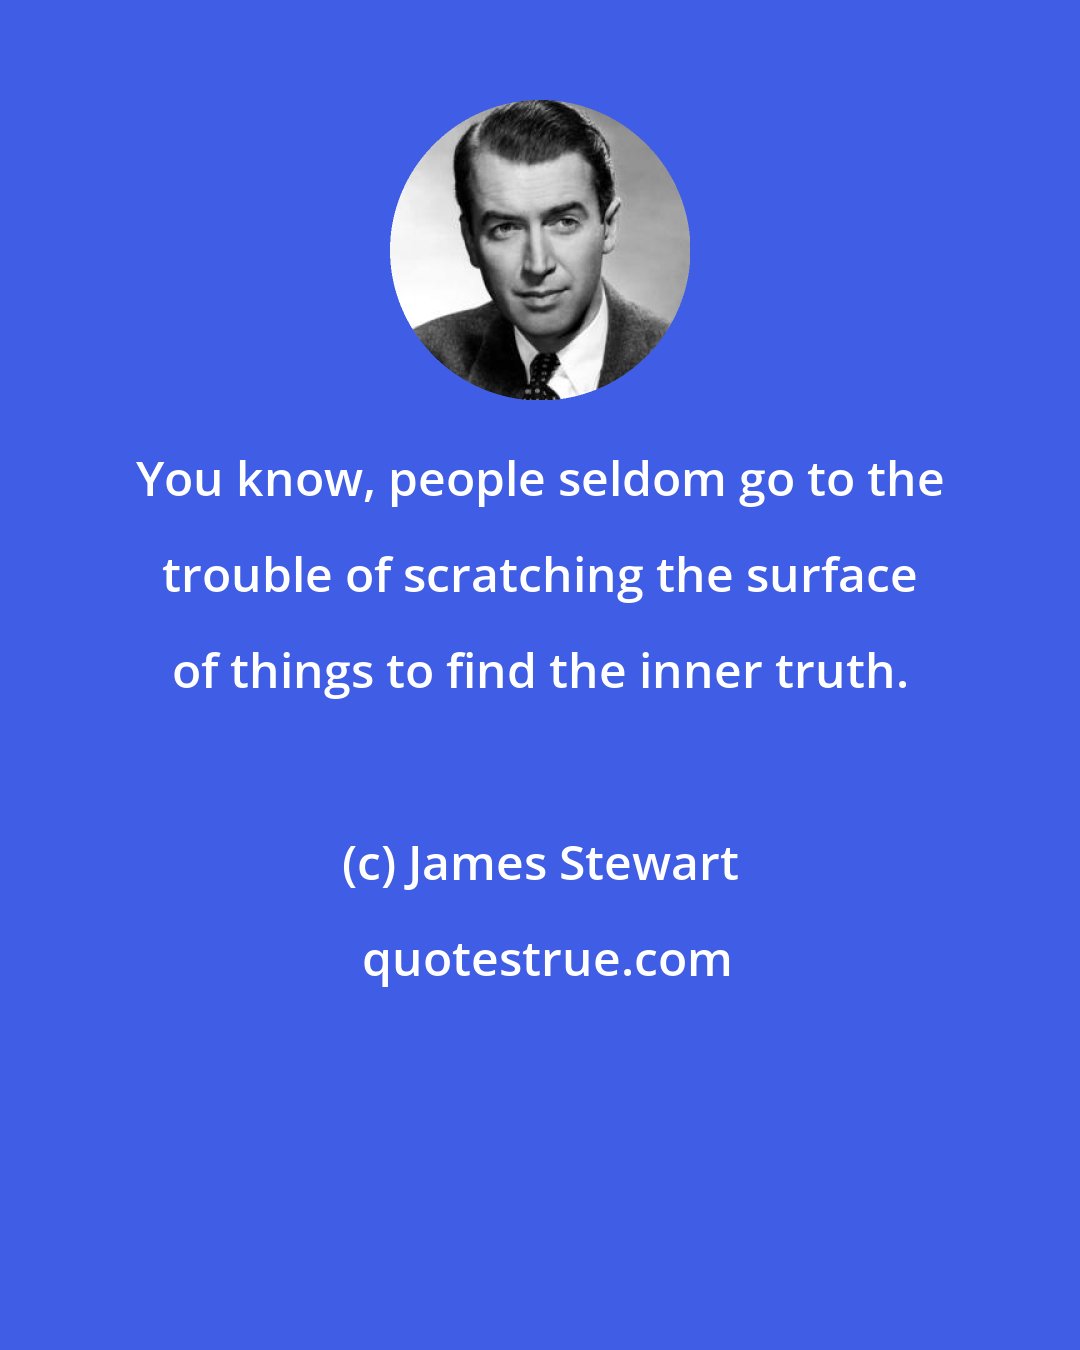 James Stewart: You know, people seldom go to the trouble of scratching the surface of things to find the inner truth.